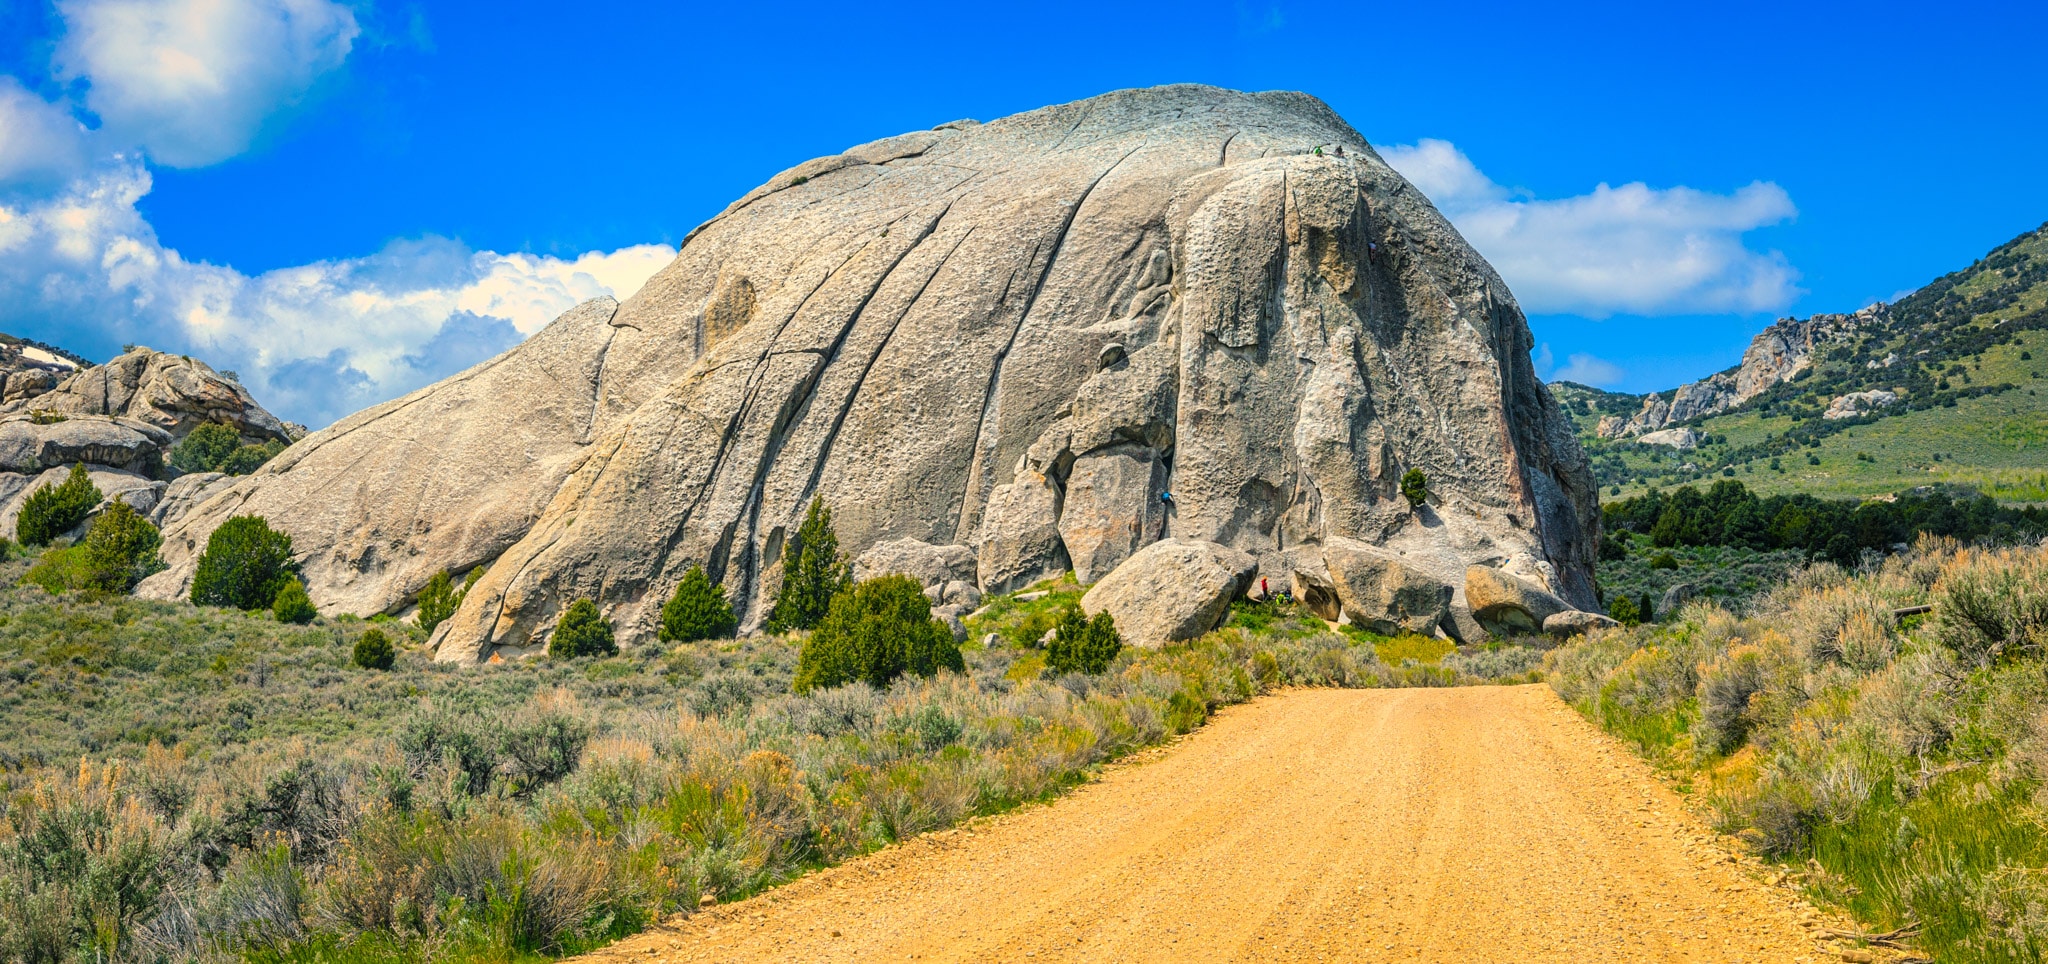 A granite rock formation that looks like a loaf of slices bread is a favorite destination for climbers in City of Rocks National Reserve in Idaho.